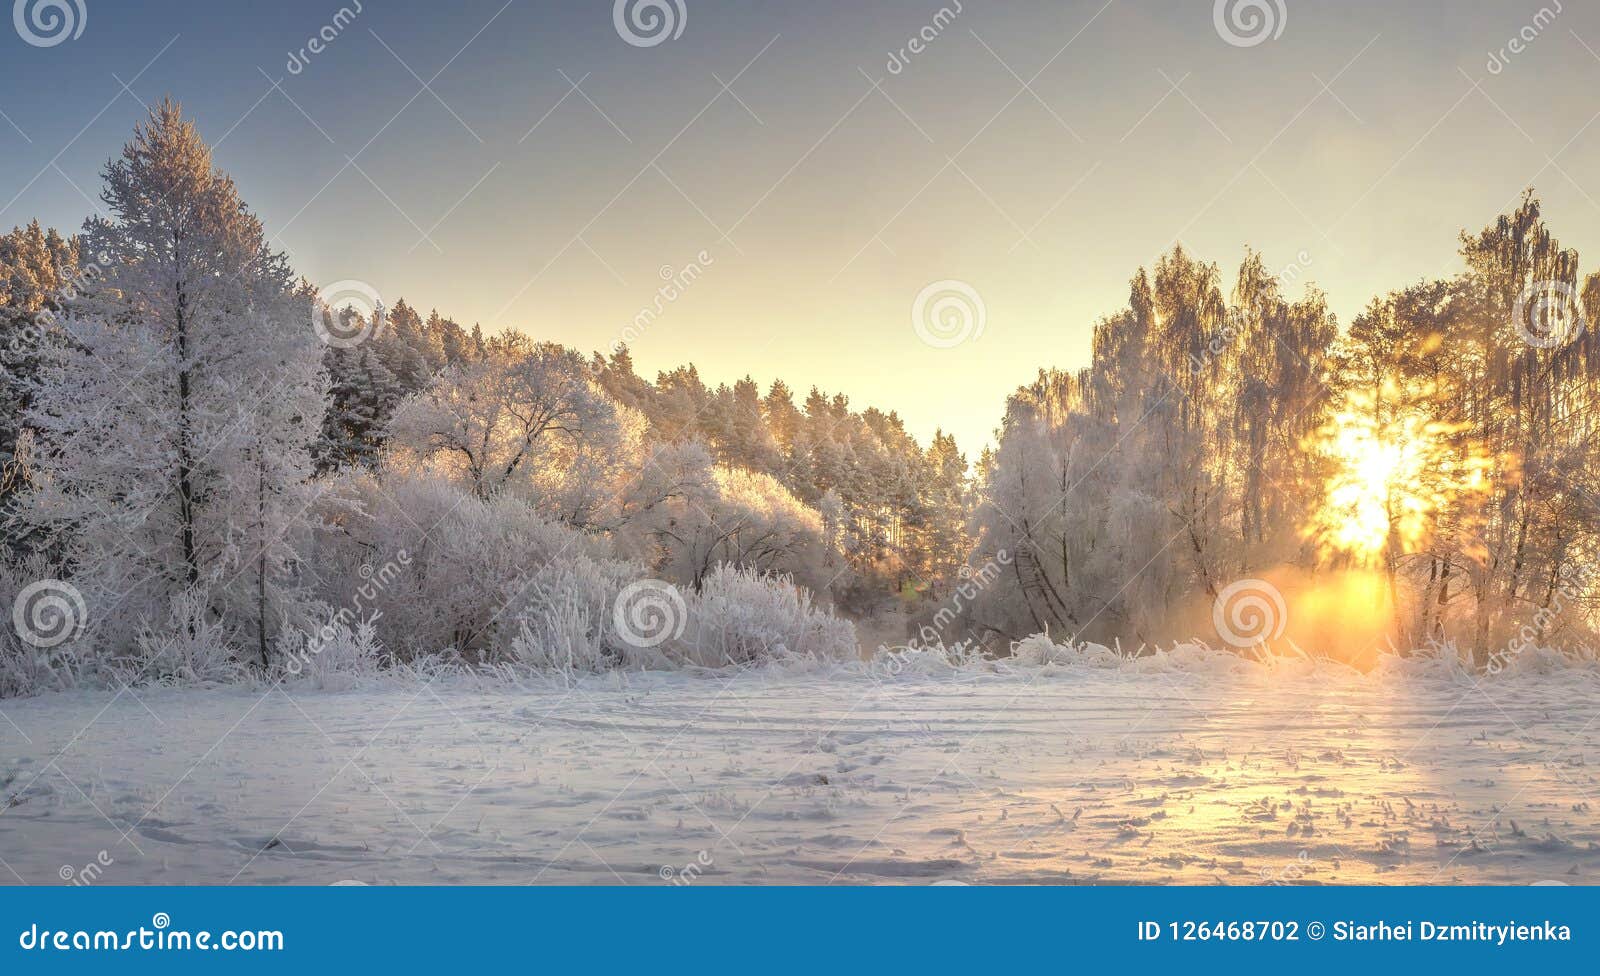 frosty trees on sunrise with yellow sunlight in winter morning. snowy winter landscape. christmas background